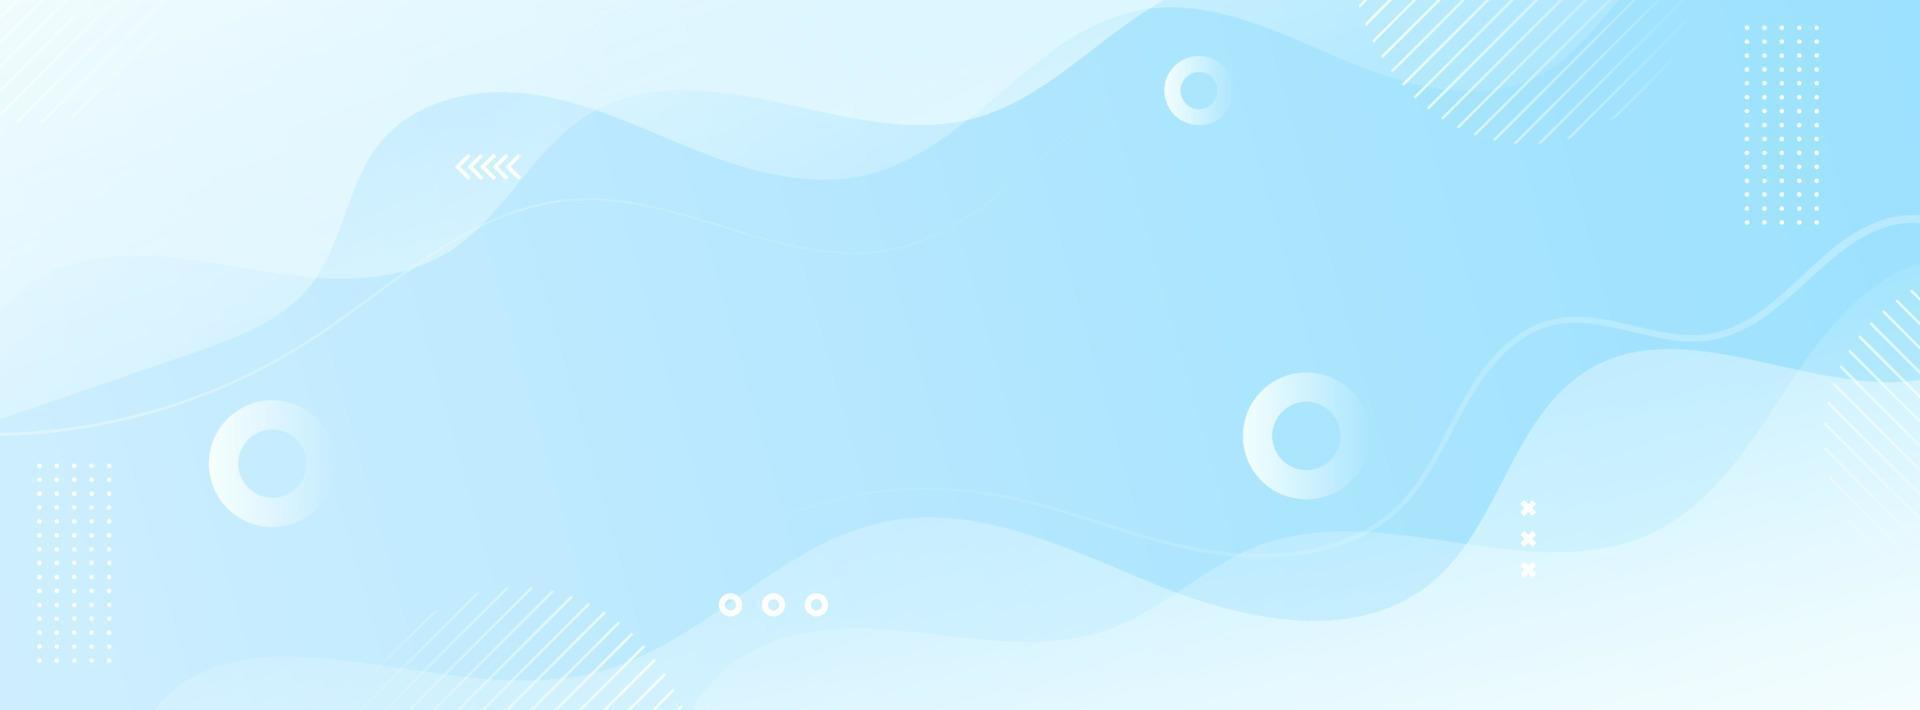 banner background. colorful, fresh blue gradient, geometric waves eps 10 vector